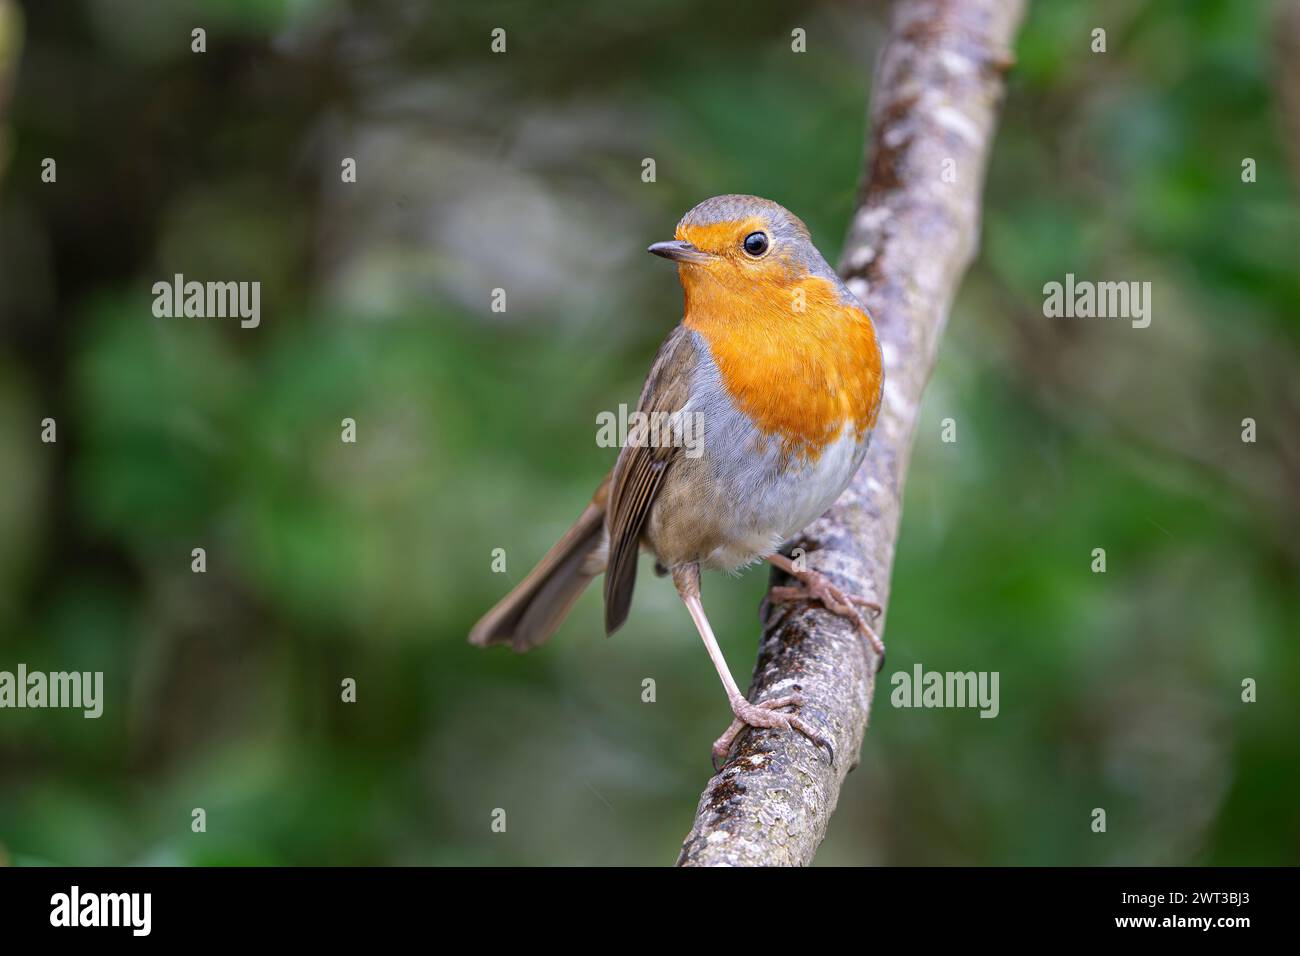 Front close up of a wild, UK robin bird (Erithacus rubecula) perching isolated on a branch in a natural woodland environment. Stock Photo